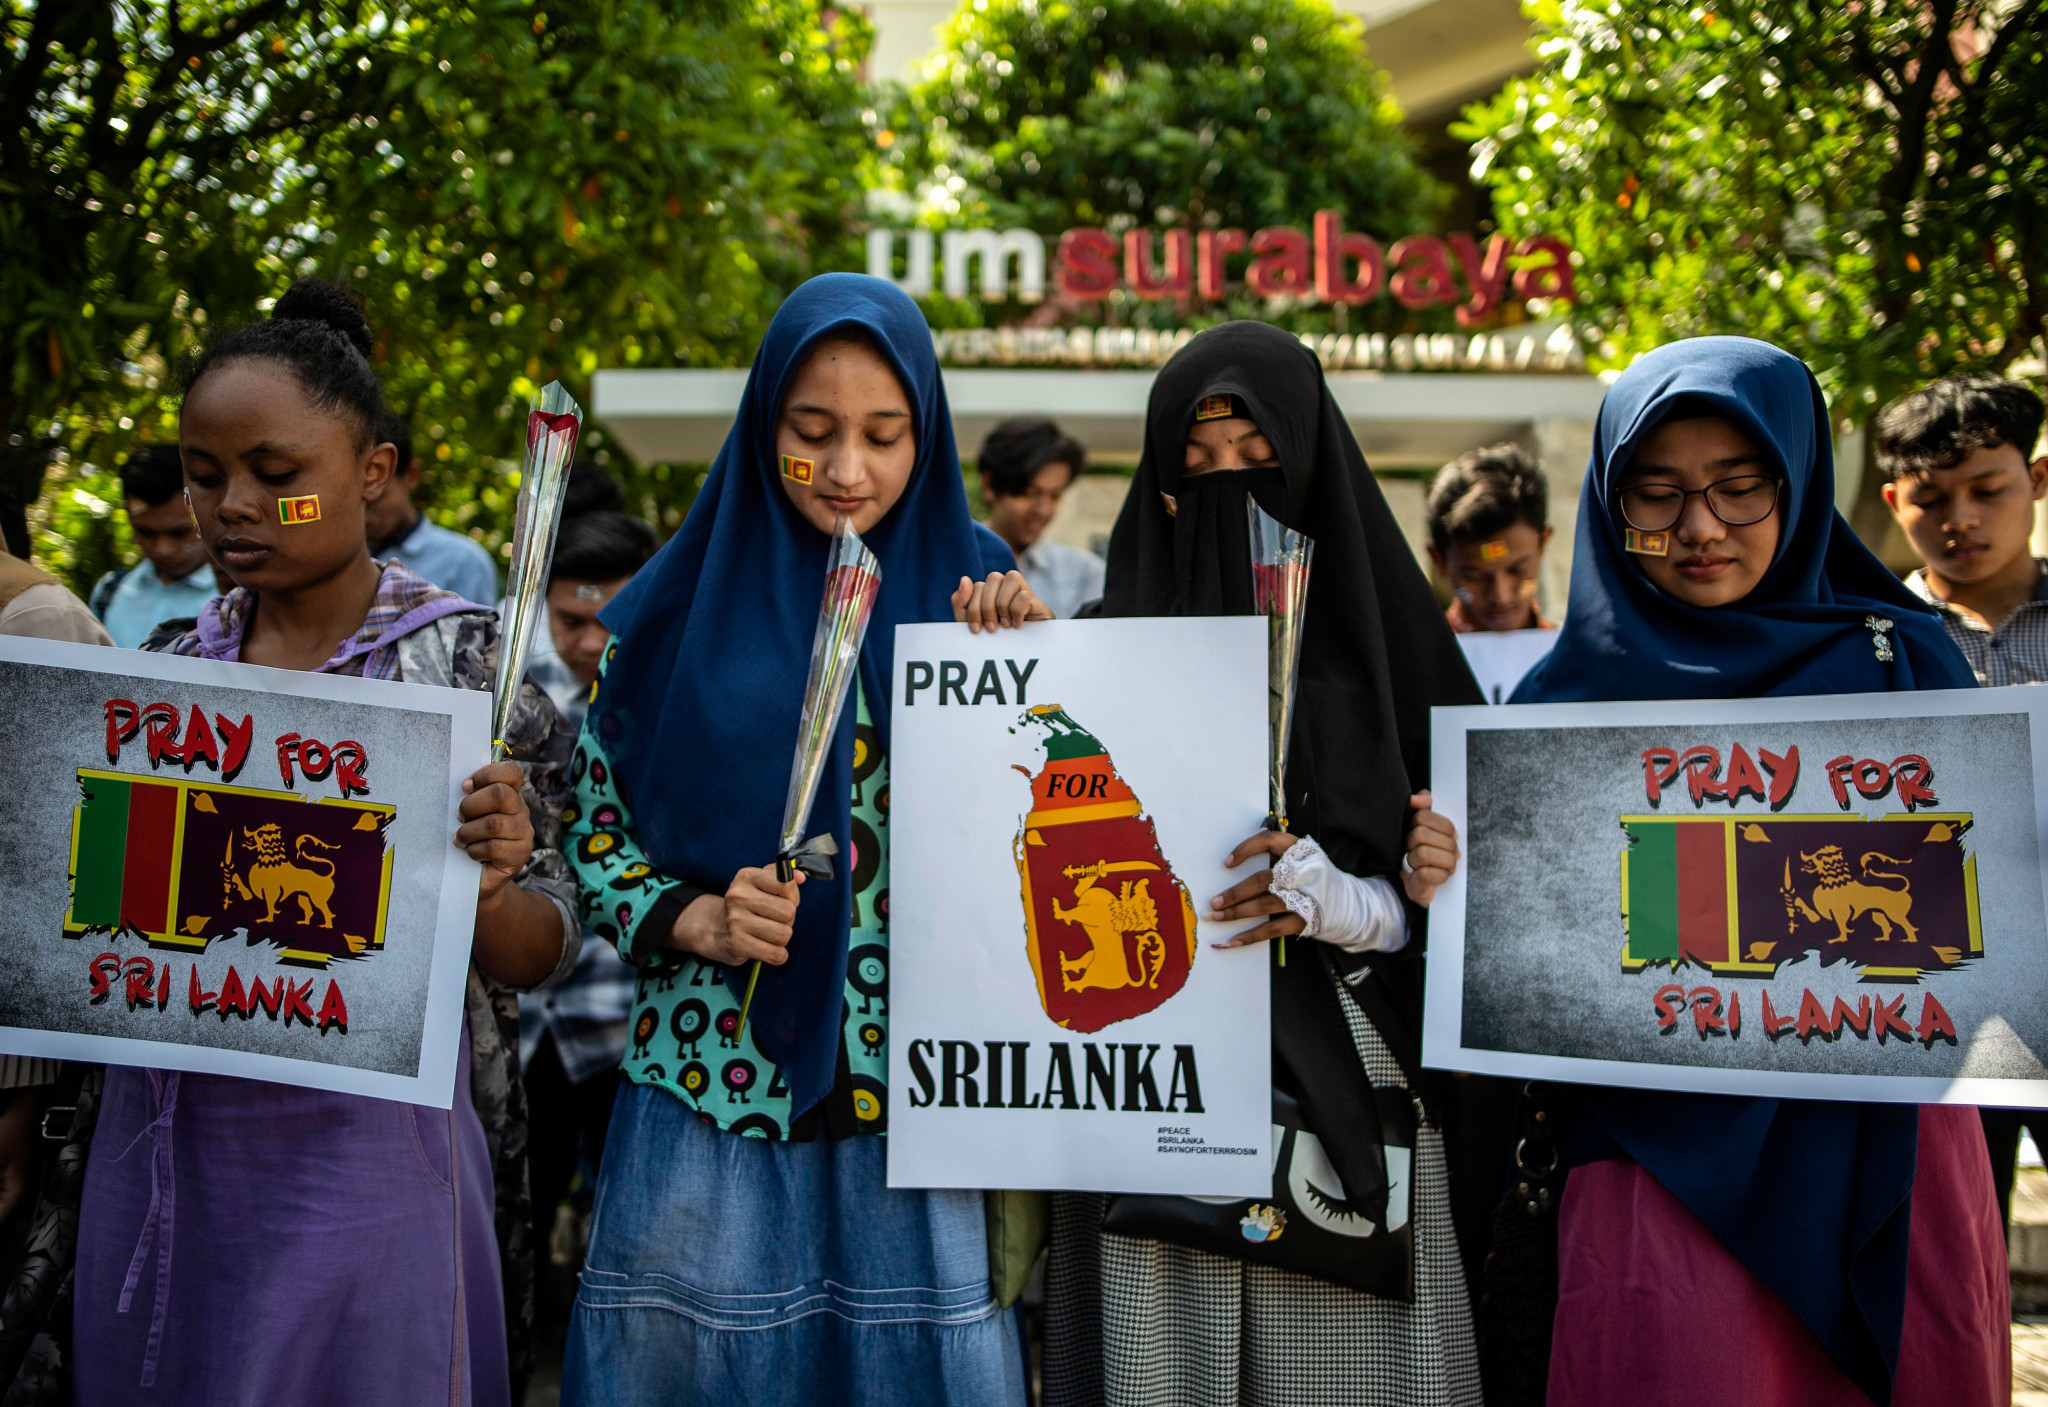 There is widespread mourning in Sri Lanka following the terror attacks ©Getty Images